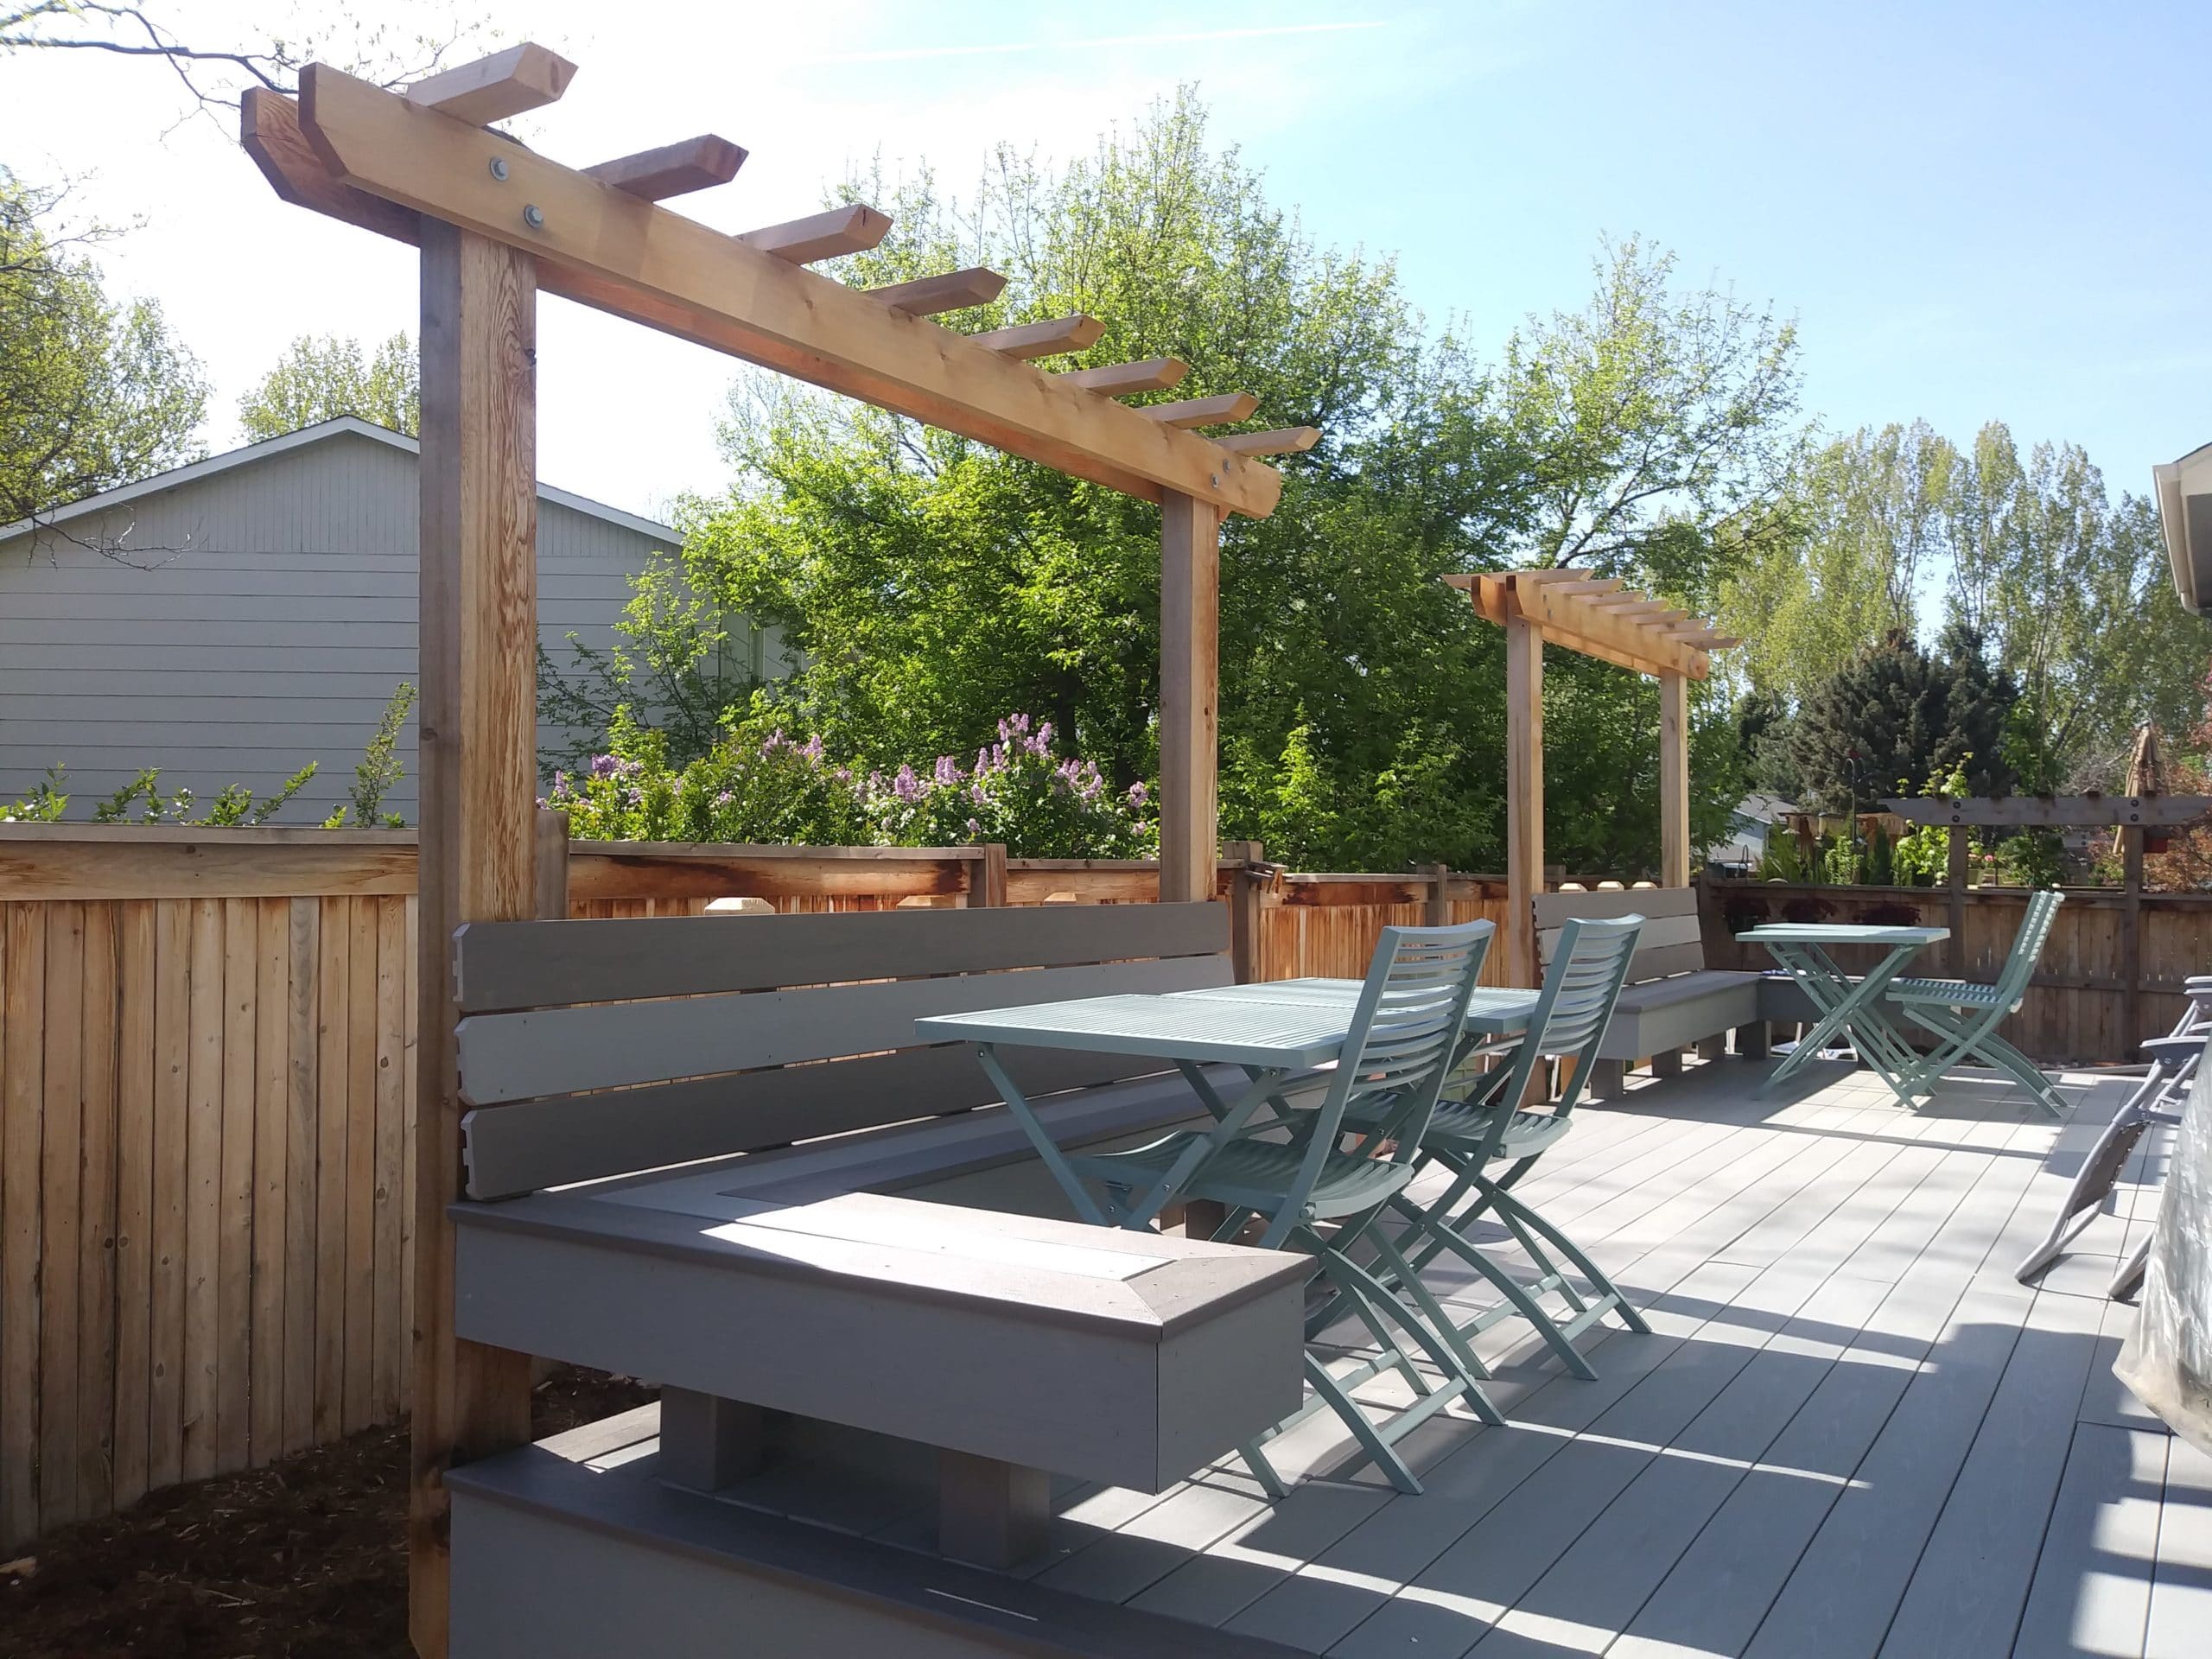 Composite deck with built in bench seats and small pergolas over top.